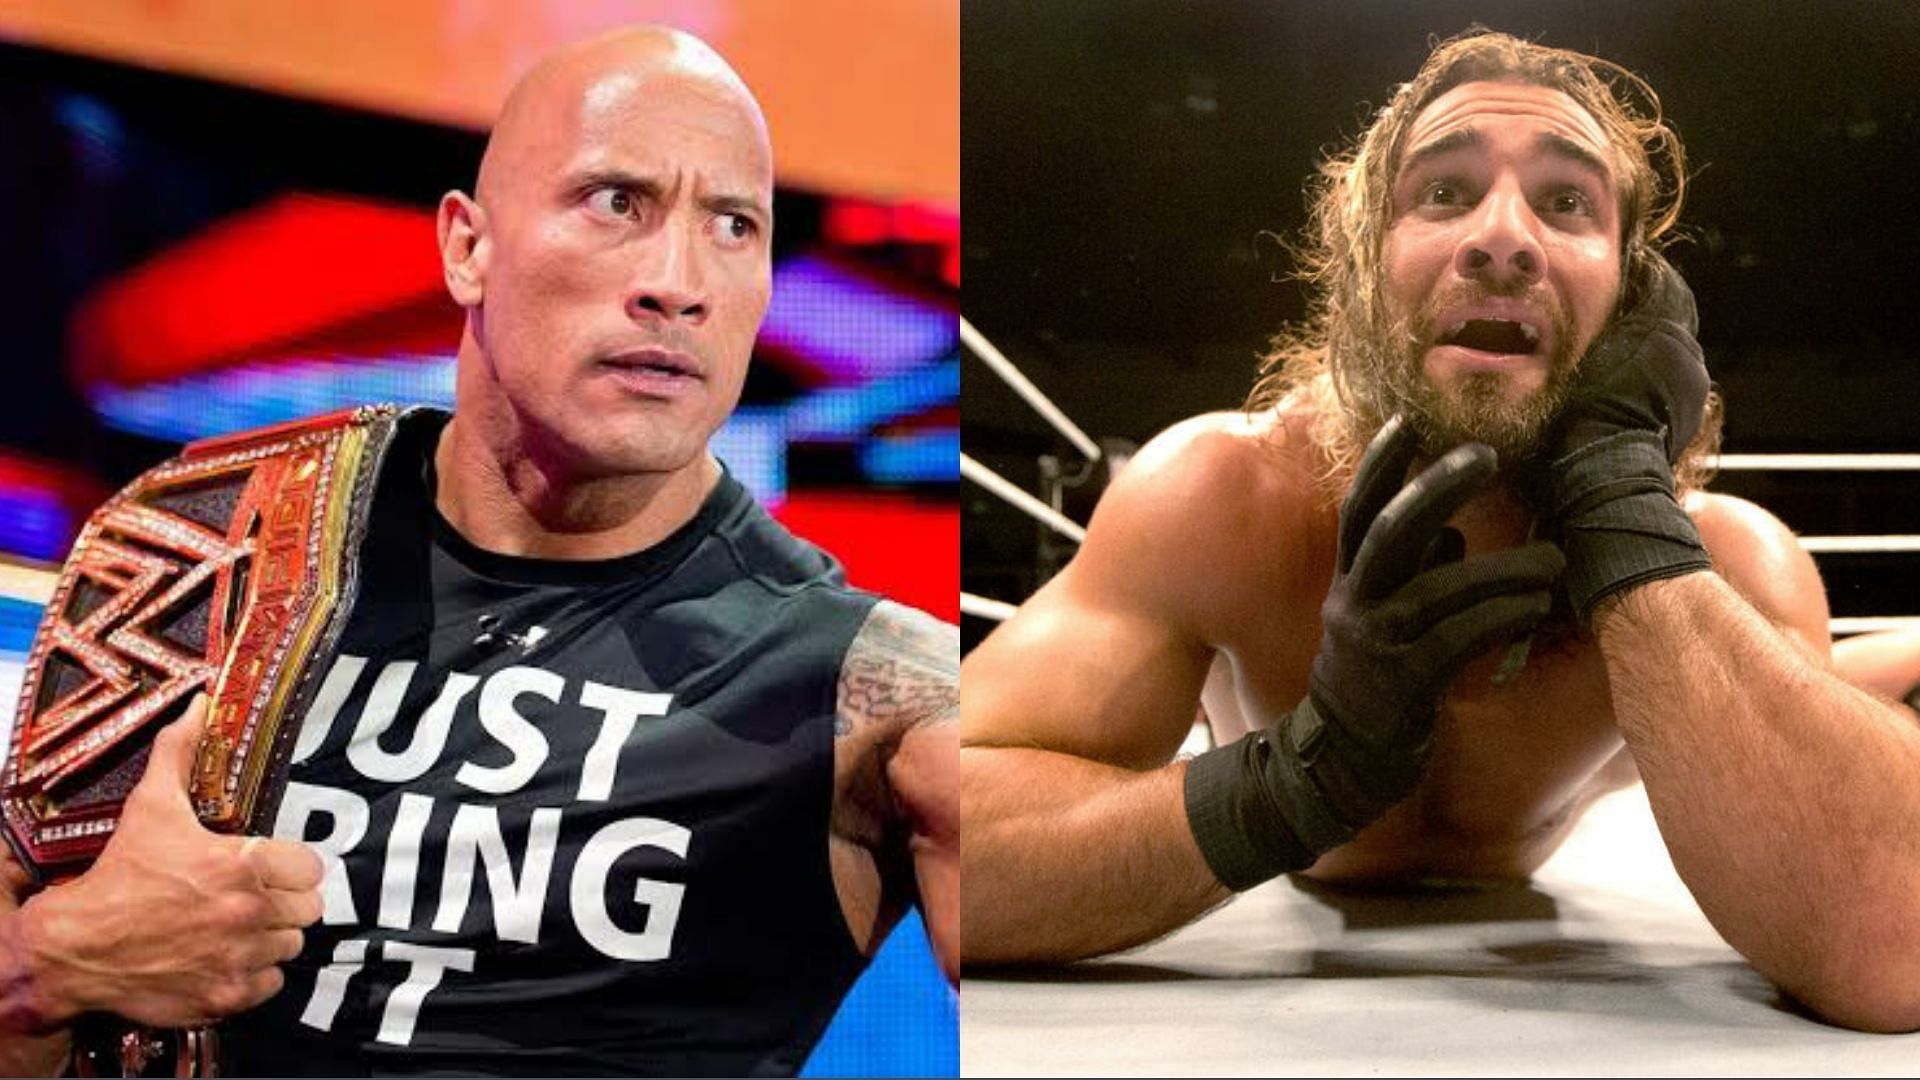 The Rock (left); Seth Rollins (right)